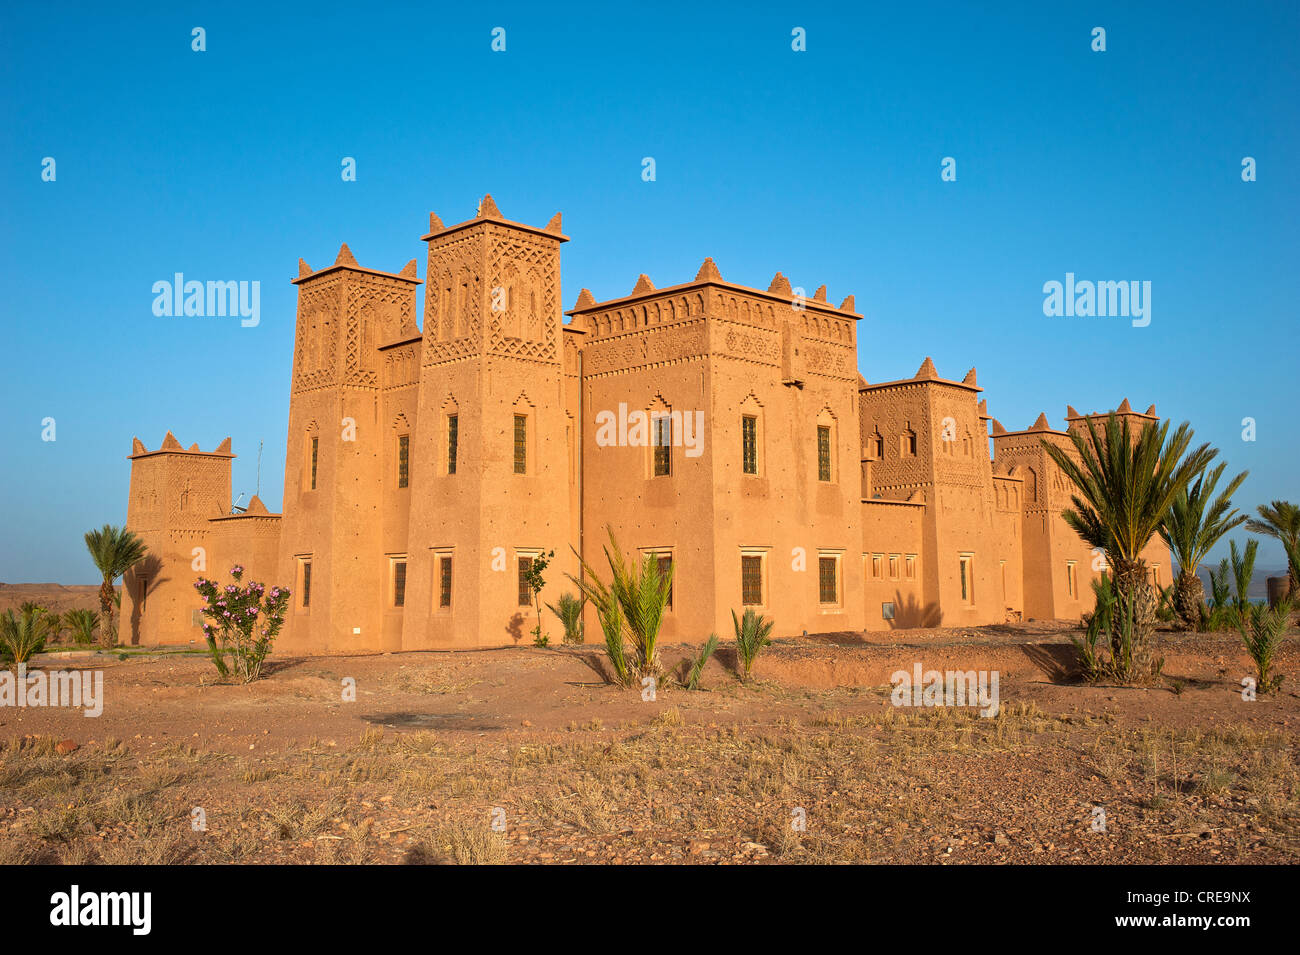 Newly erected Kasbah, Tighremt or Berber residential castle made from rammed earth, Ouarzazate, Lower Dades Valley Stock Photo